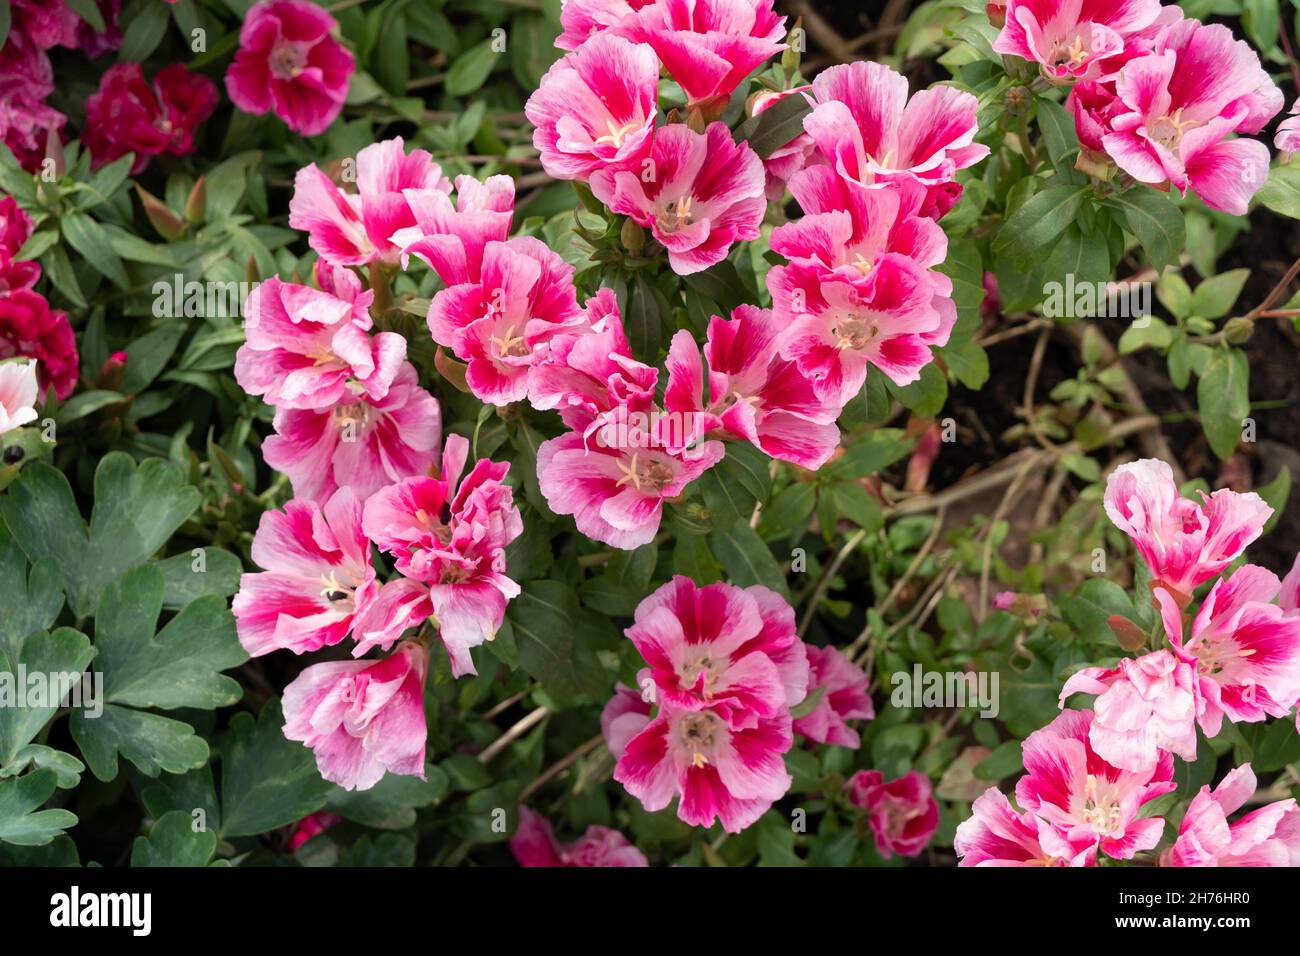 The delicate pink flowers of Godetia grandiflora bloom profusely in the garden in summer. Stock Photo